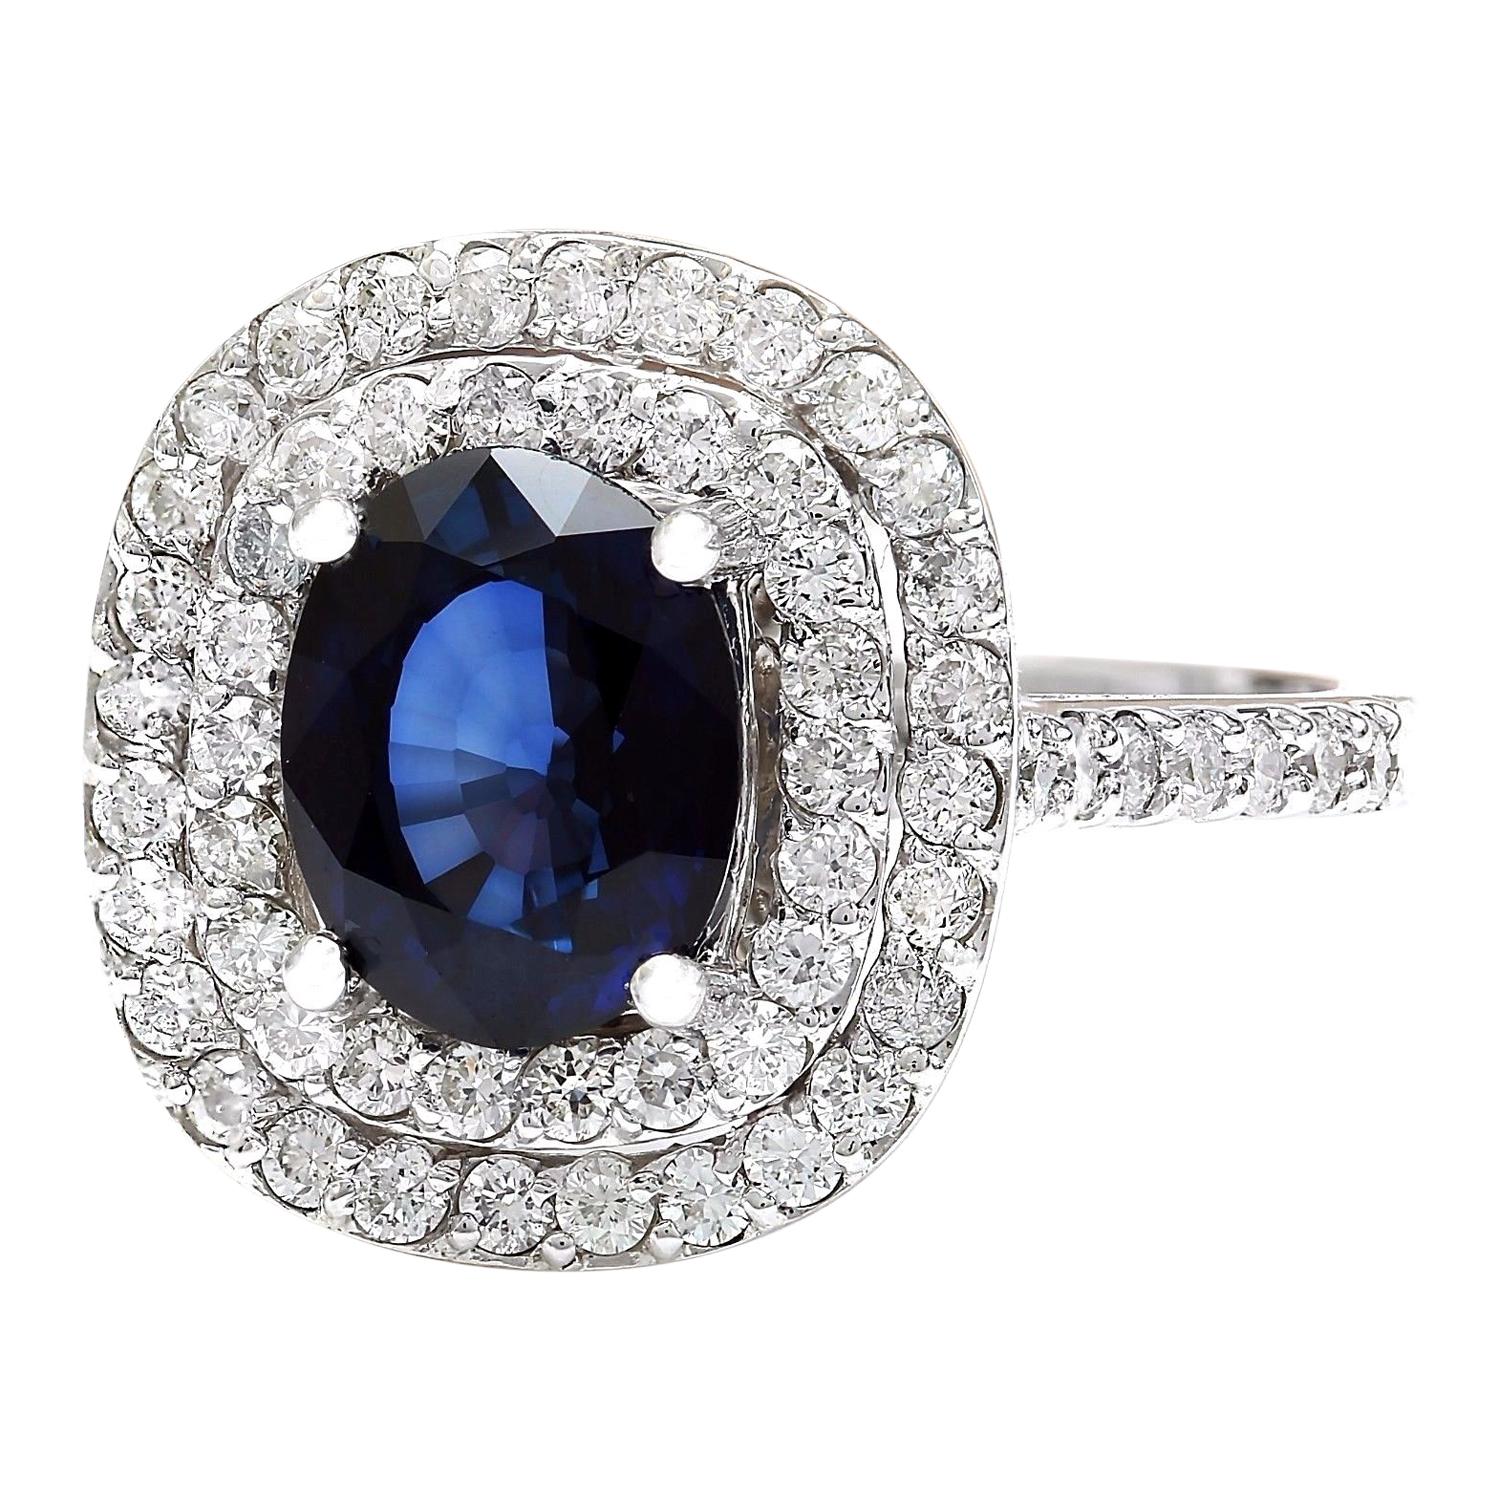 3.48 Carat Natural Sapphire 14K Solid White Gold Diamond Ring
 Item Type: Ring
 Item Style: Engagement
 Material: 14K White Gold
 Mainstone: Sapphire
 Stone Color: Blue
 Stone Weight: 2.48 Carat
 Stone Shape: Oval
 Stone Quantity: 1
 Stone